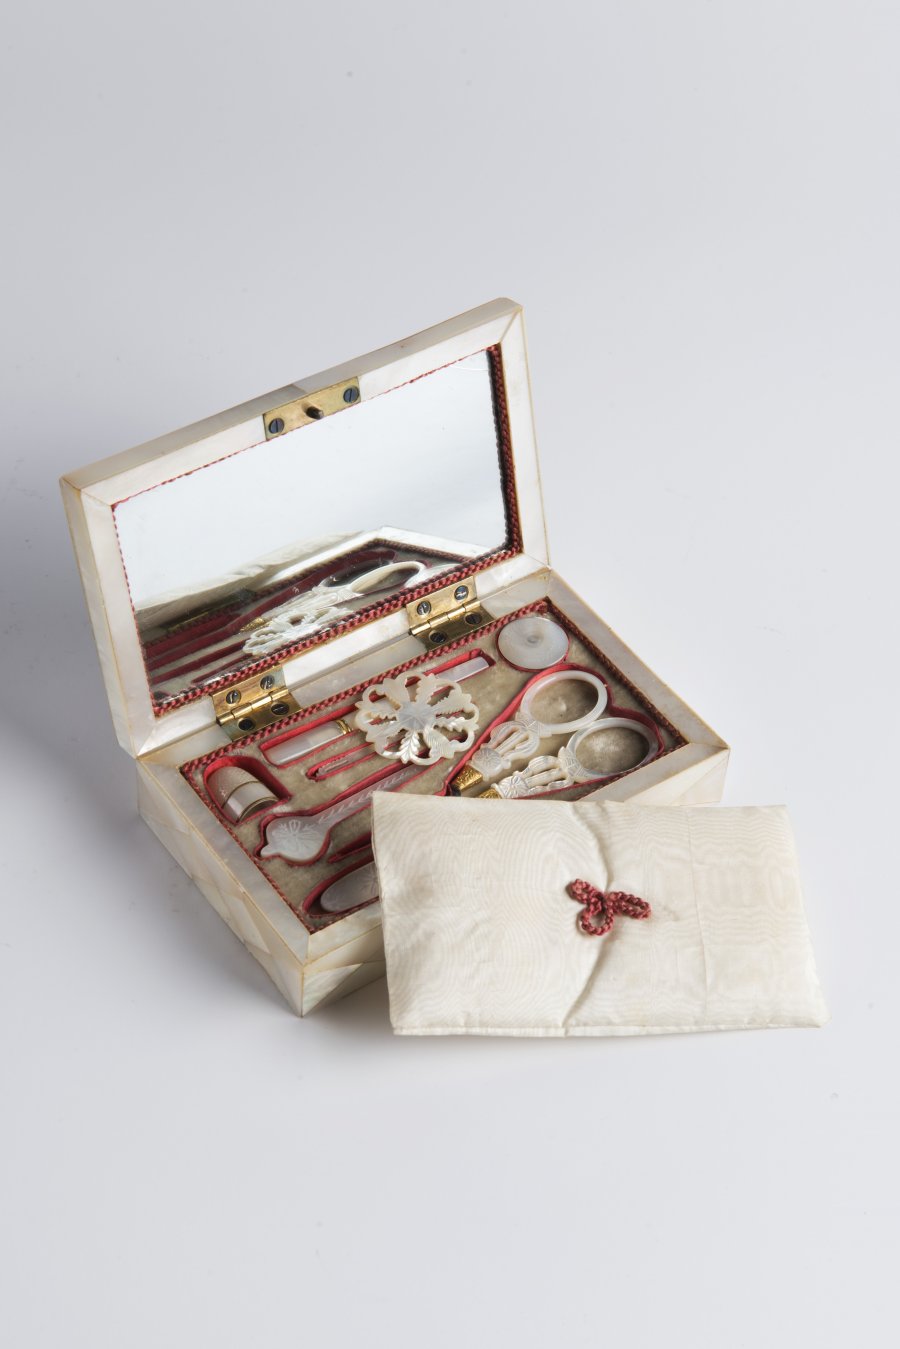 A SEWING NOTION BOX WITH A MINIATURE